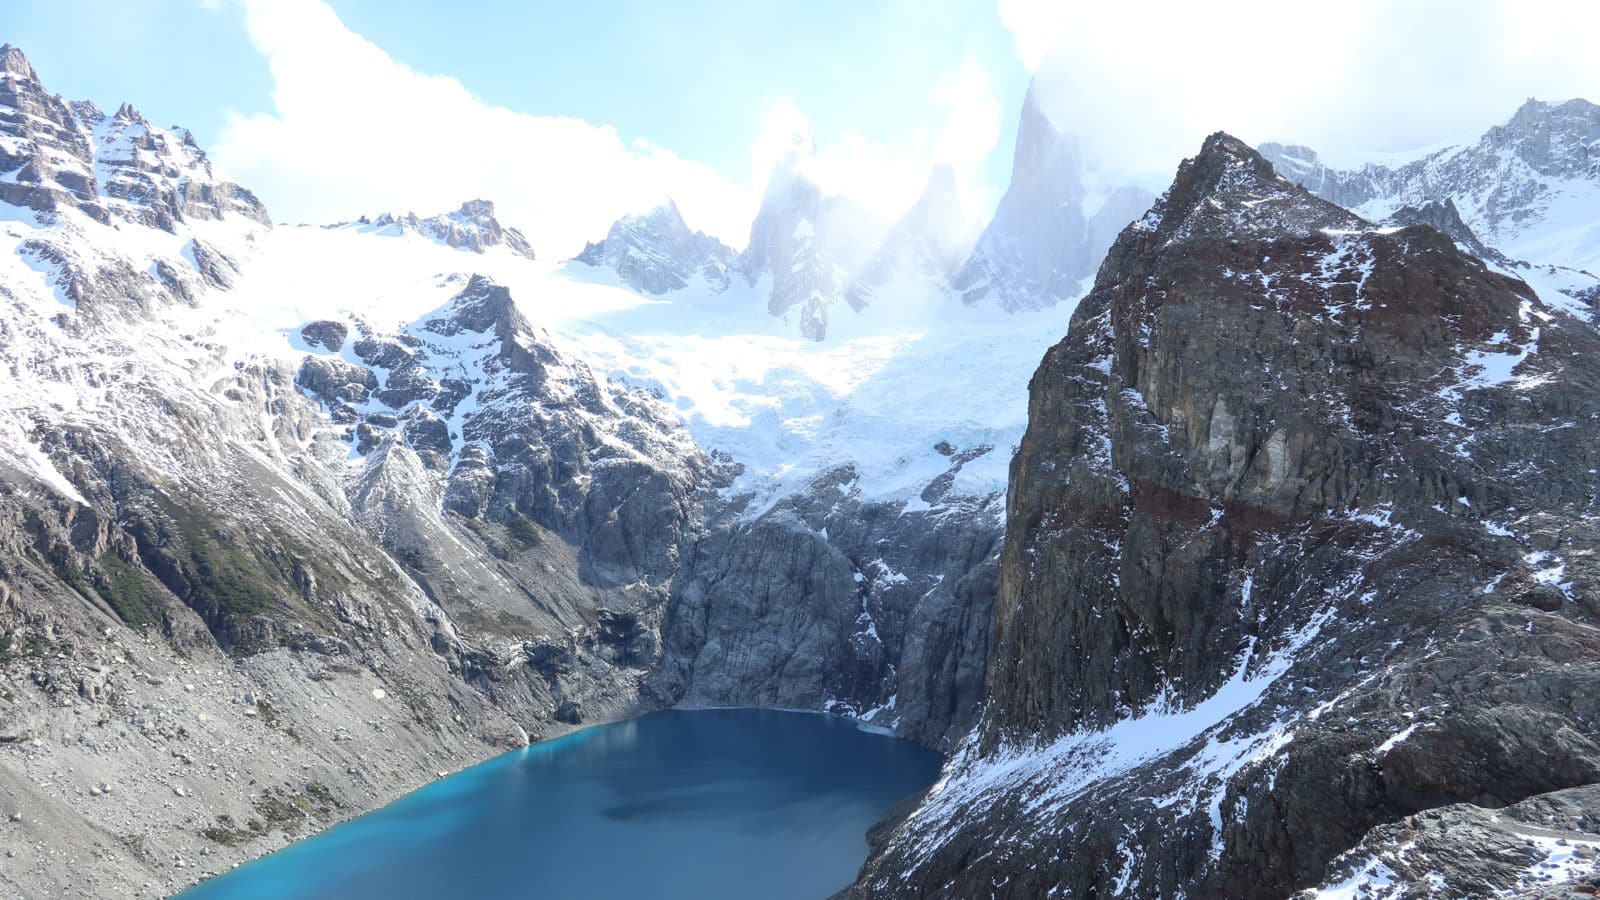 Journey through the raw beauty of Patagonia, Argentina